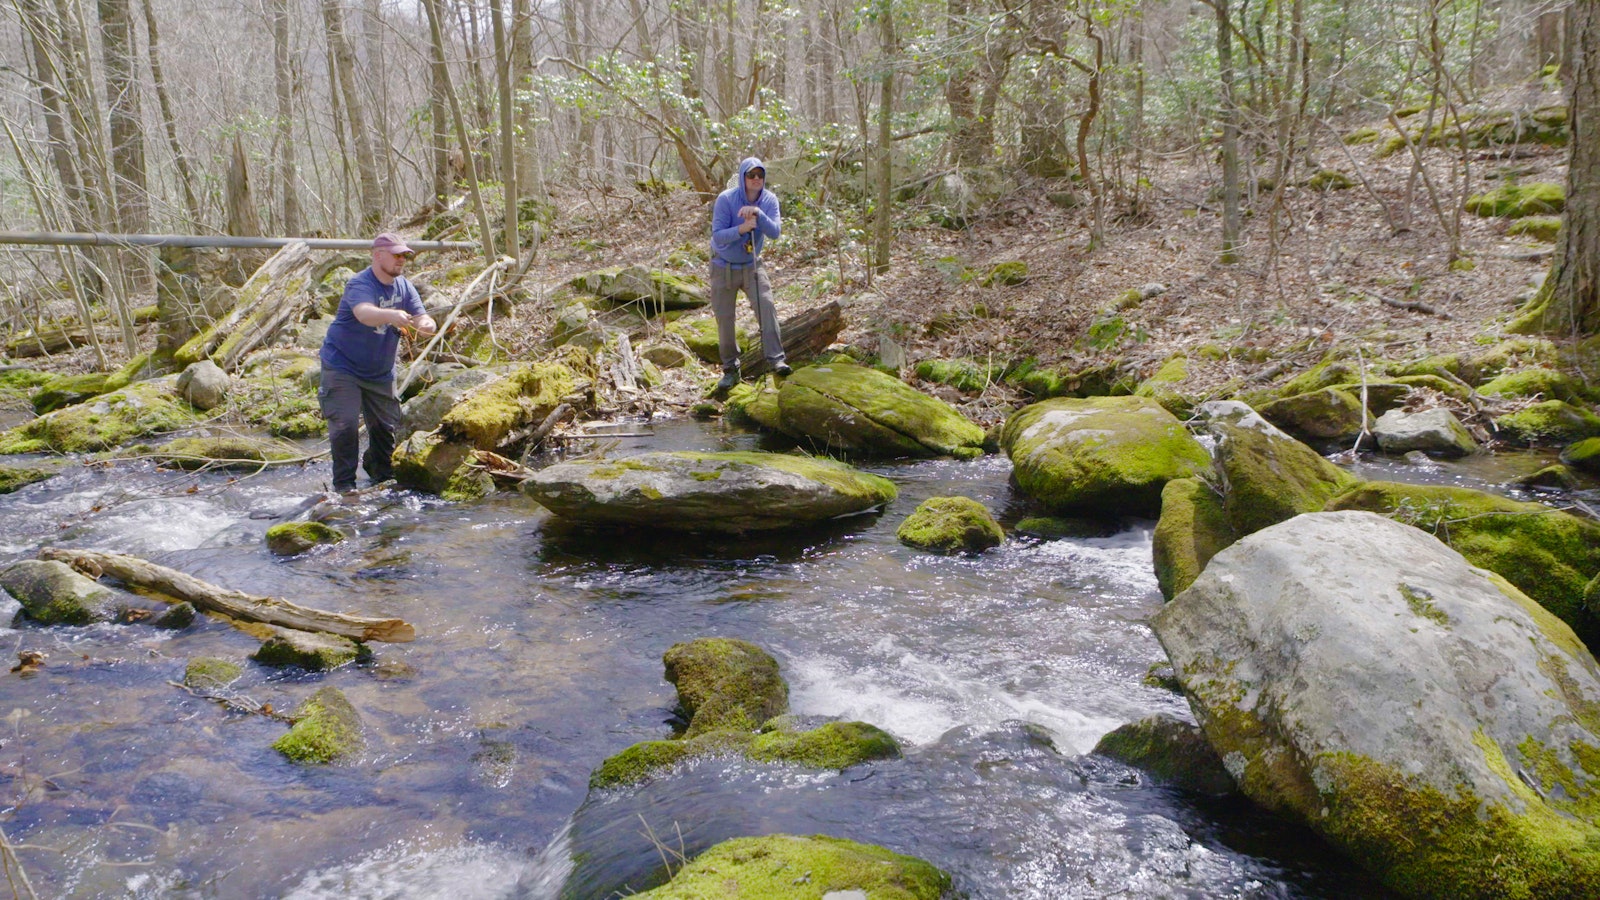 Two people fly fish along a stony river